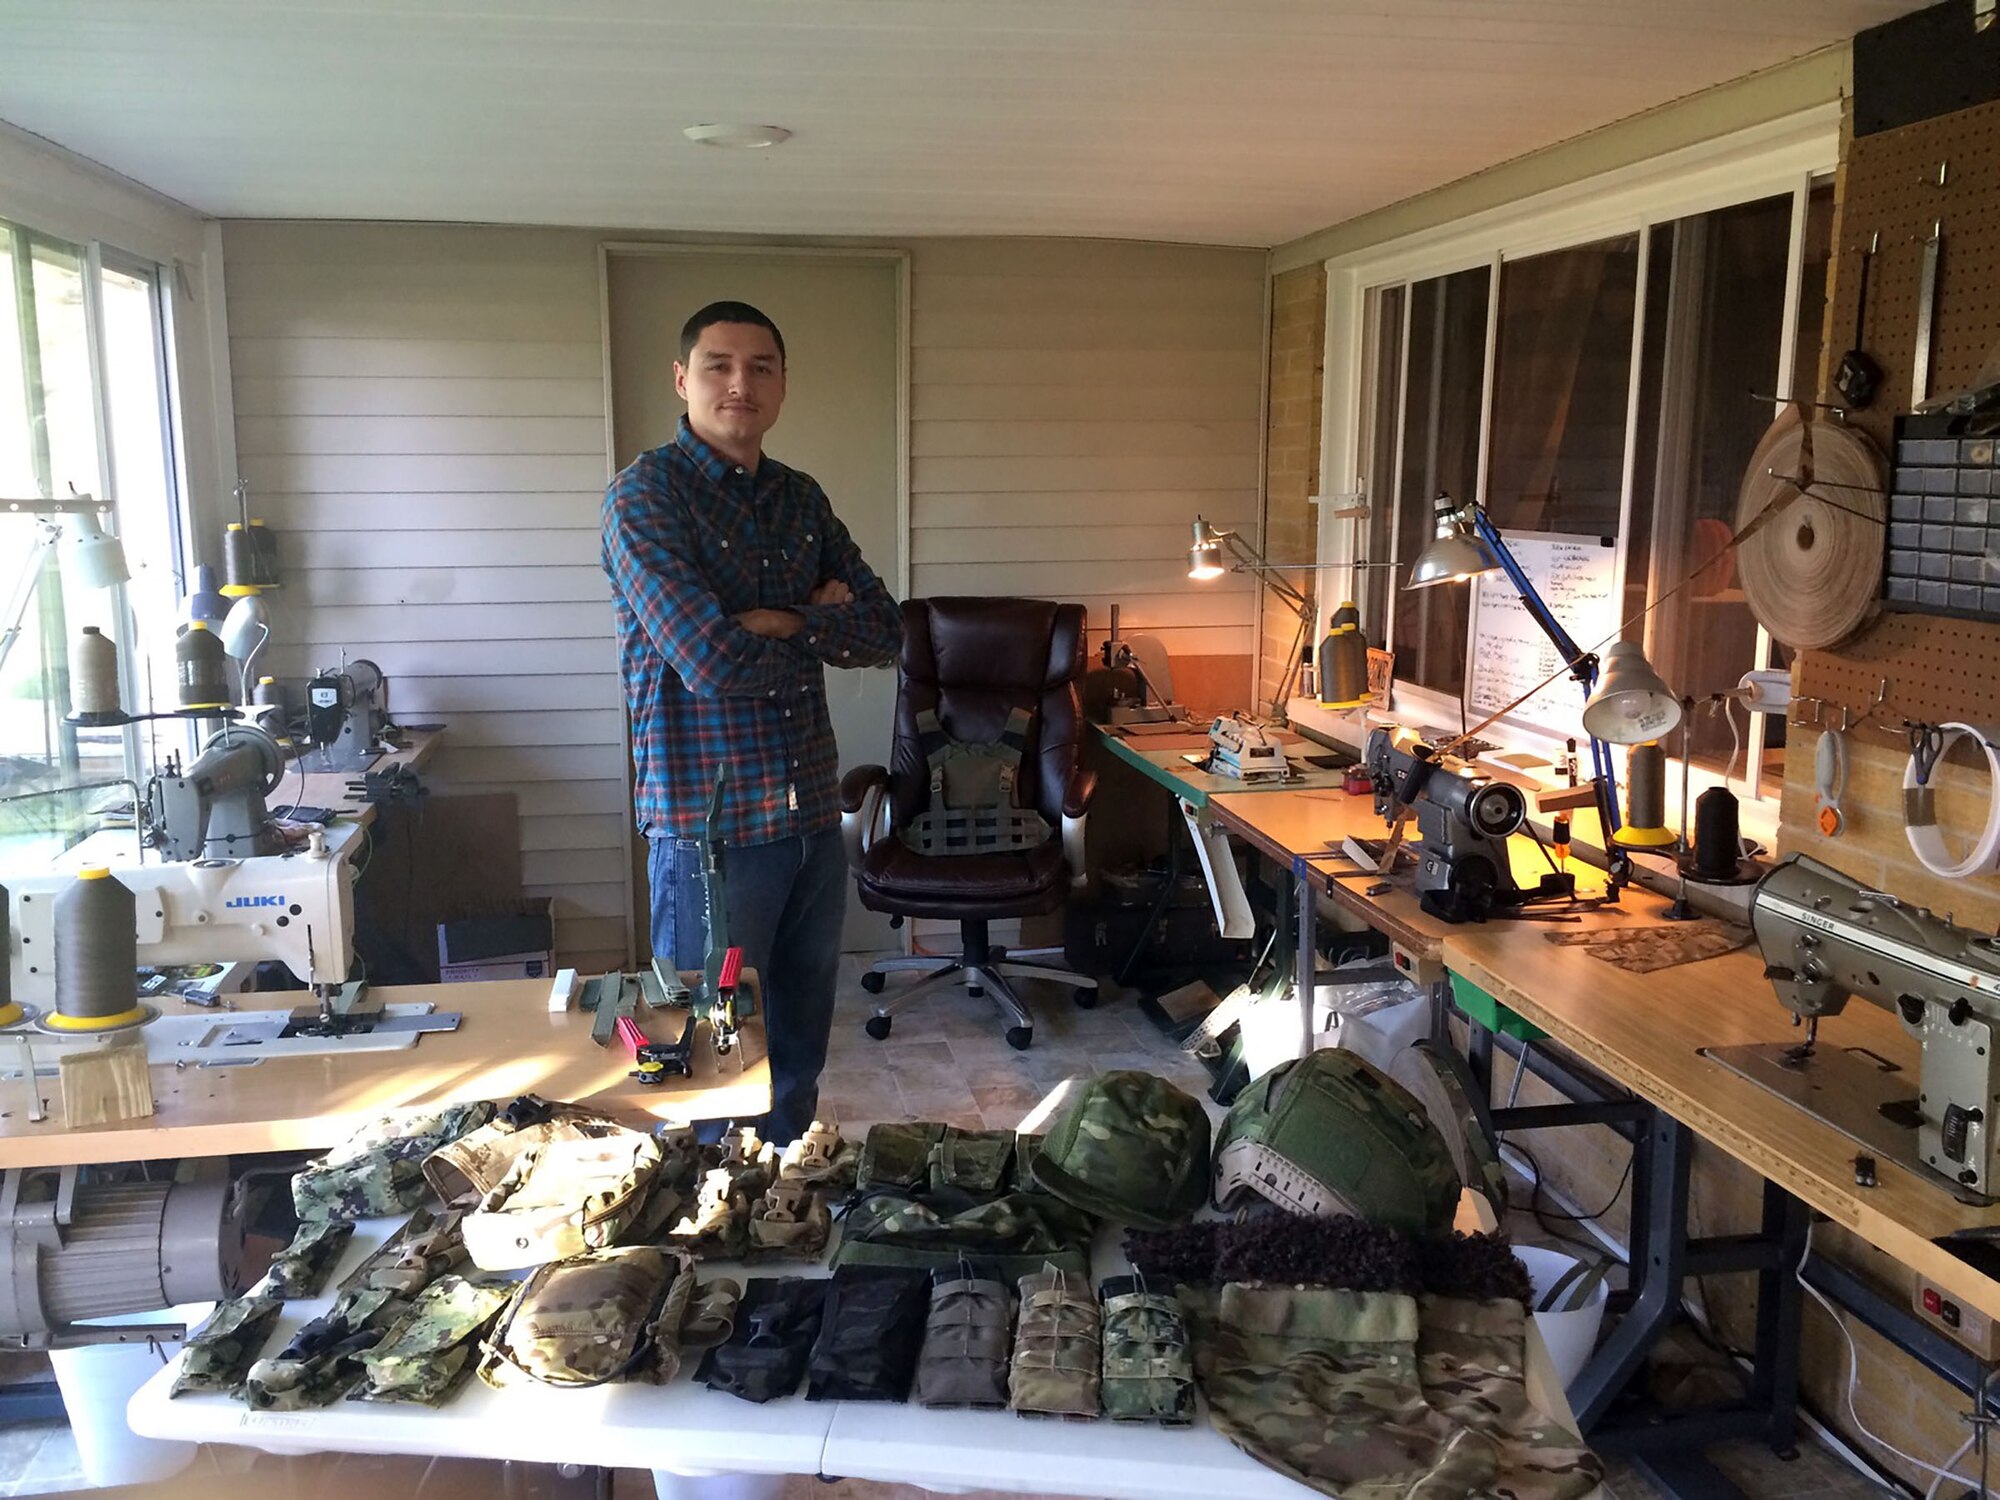 Airman First Class Devin Litton, 445th Operations Support Squadron Aircrew Flight Equipment shop, poses in his home workshop Oct. 20, 2017. Litton runs his own tactical gear business out of his garage.